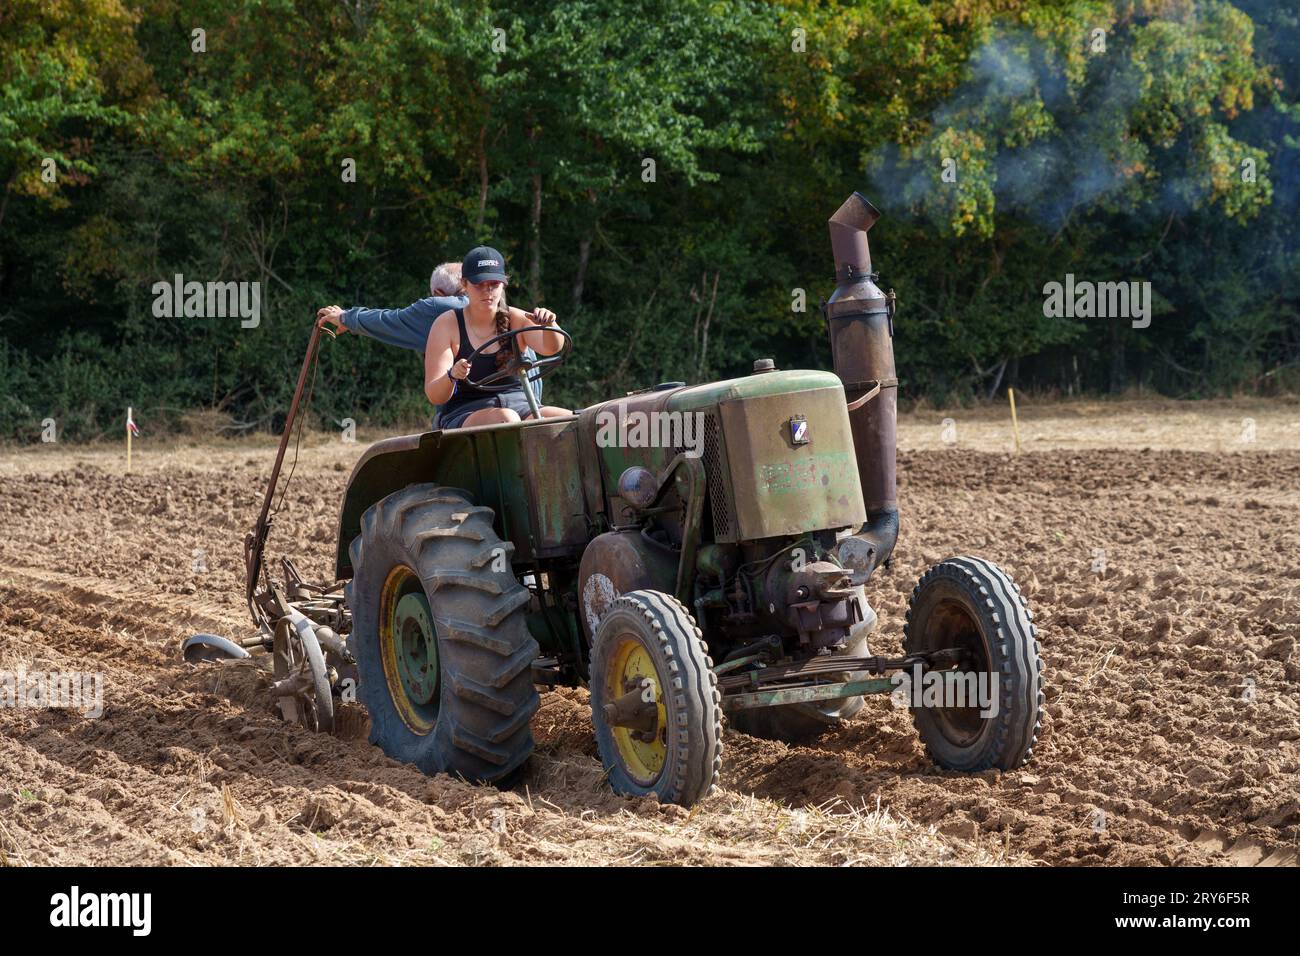 Competitors on vintage farm machinery taking place in a ploughing competition. Stock Photo